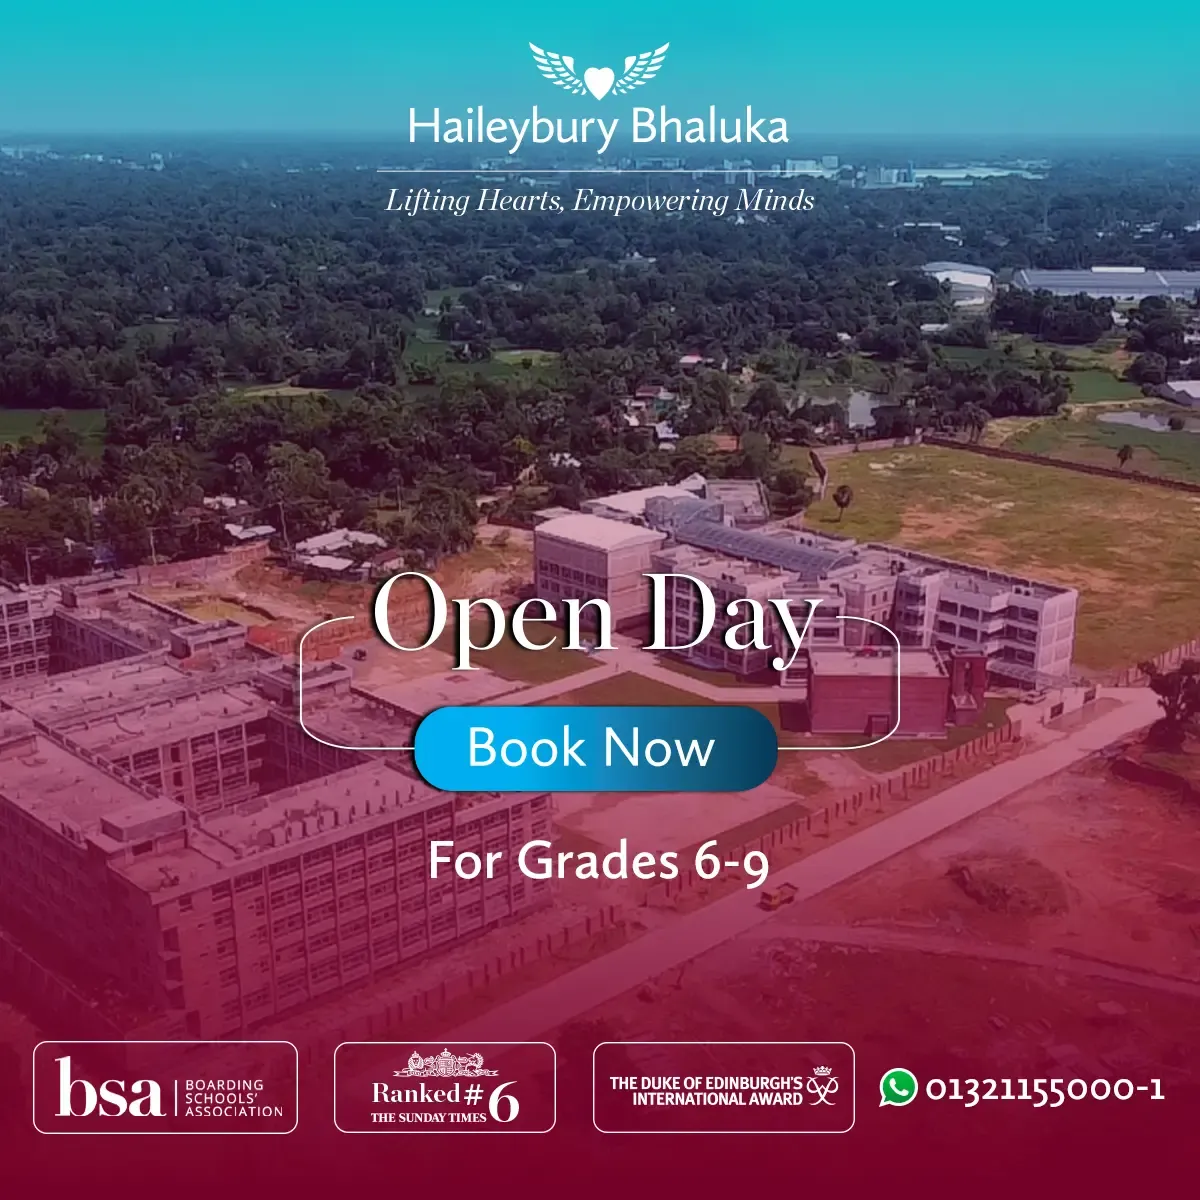 Haileybury Bhaluka is staging a special open day for founding students.